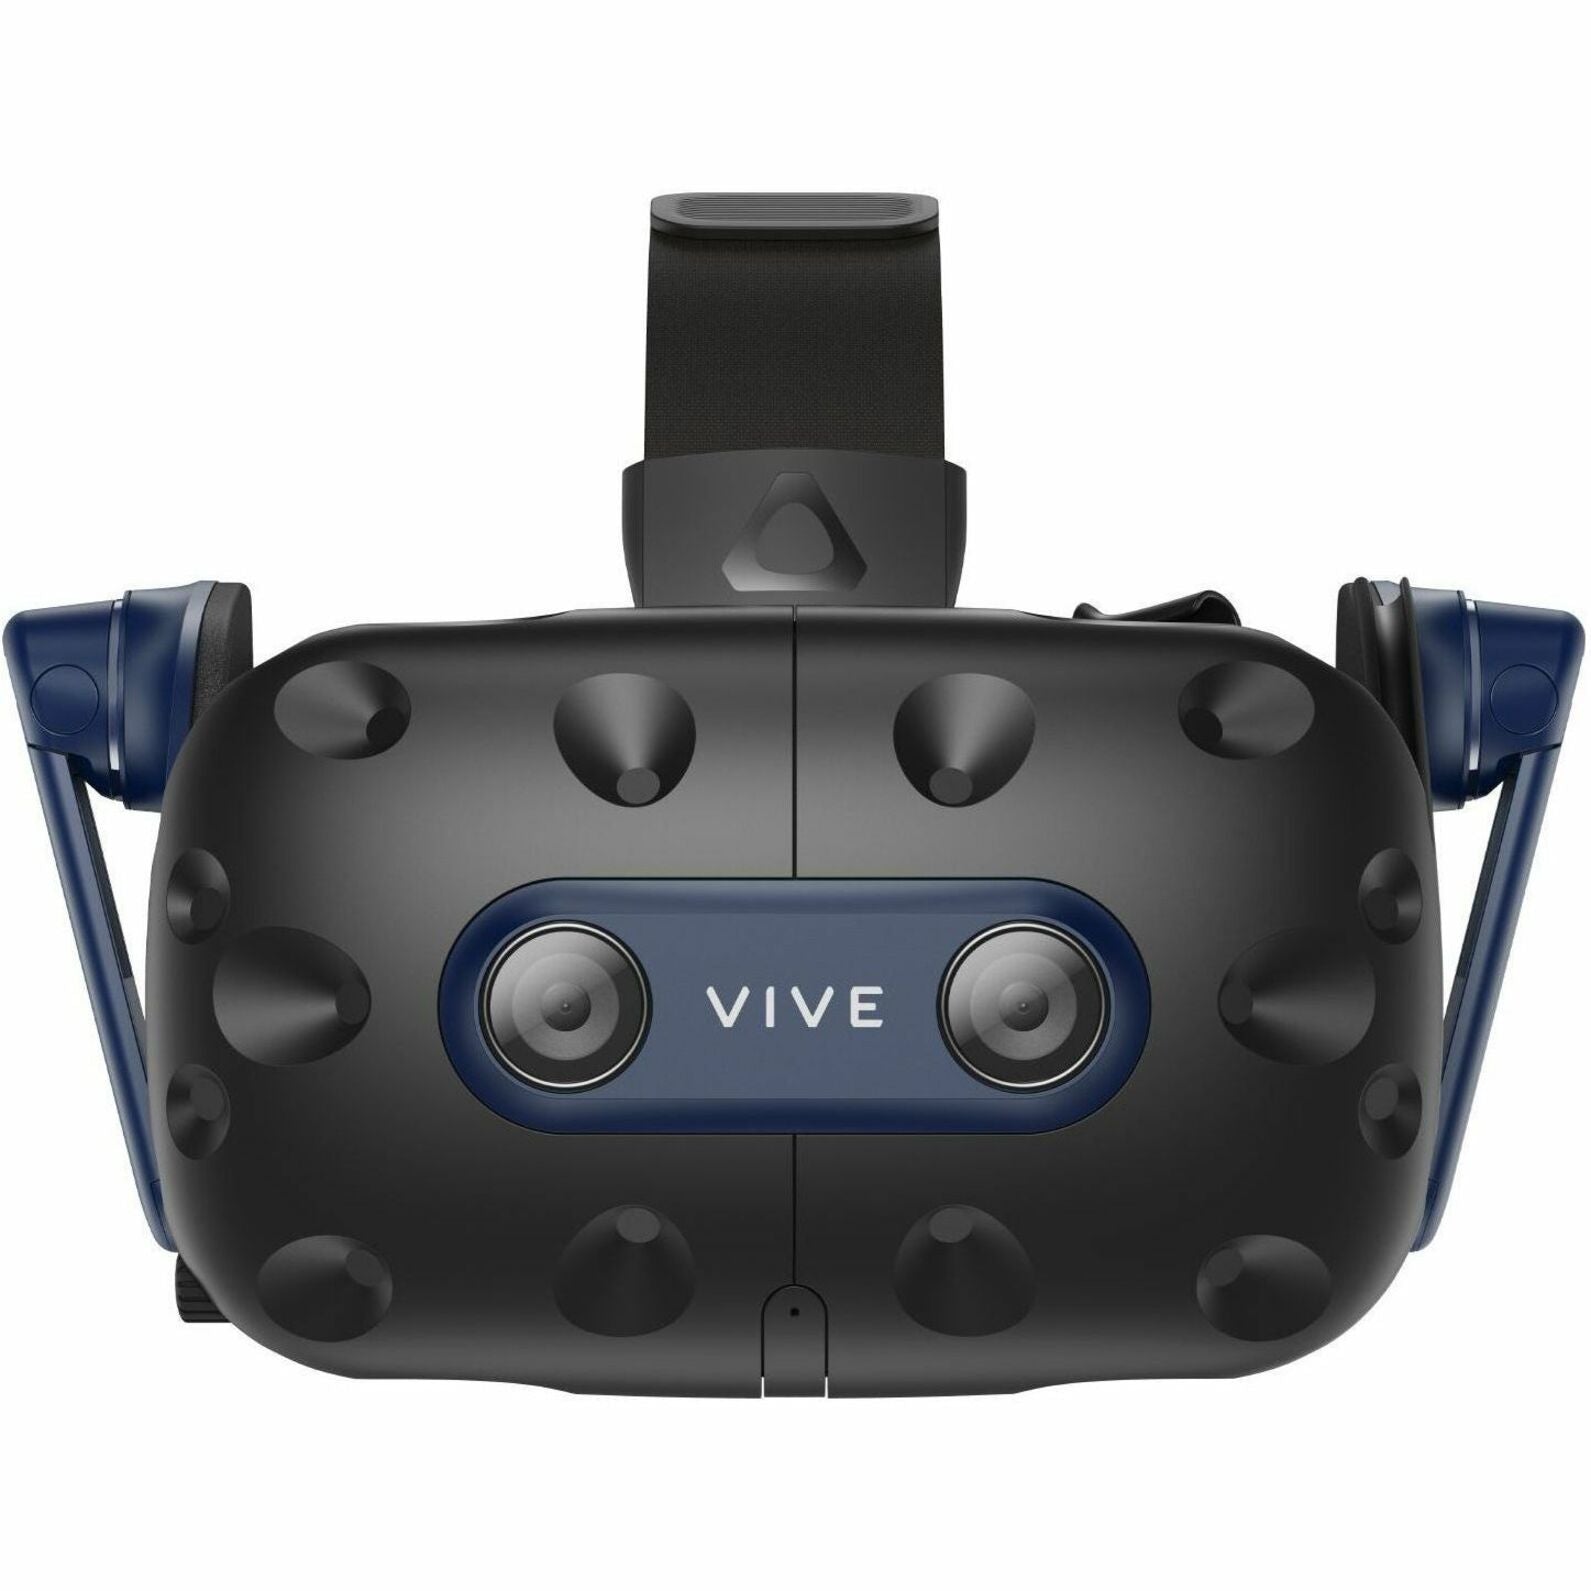 VIVE 99HASZ011-00 Pro 2 Full Kit, Virtual Reality Headset with Adjustable Interpupillary Distance (IPD) and 120° Field of View